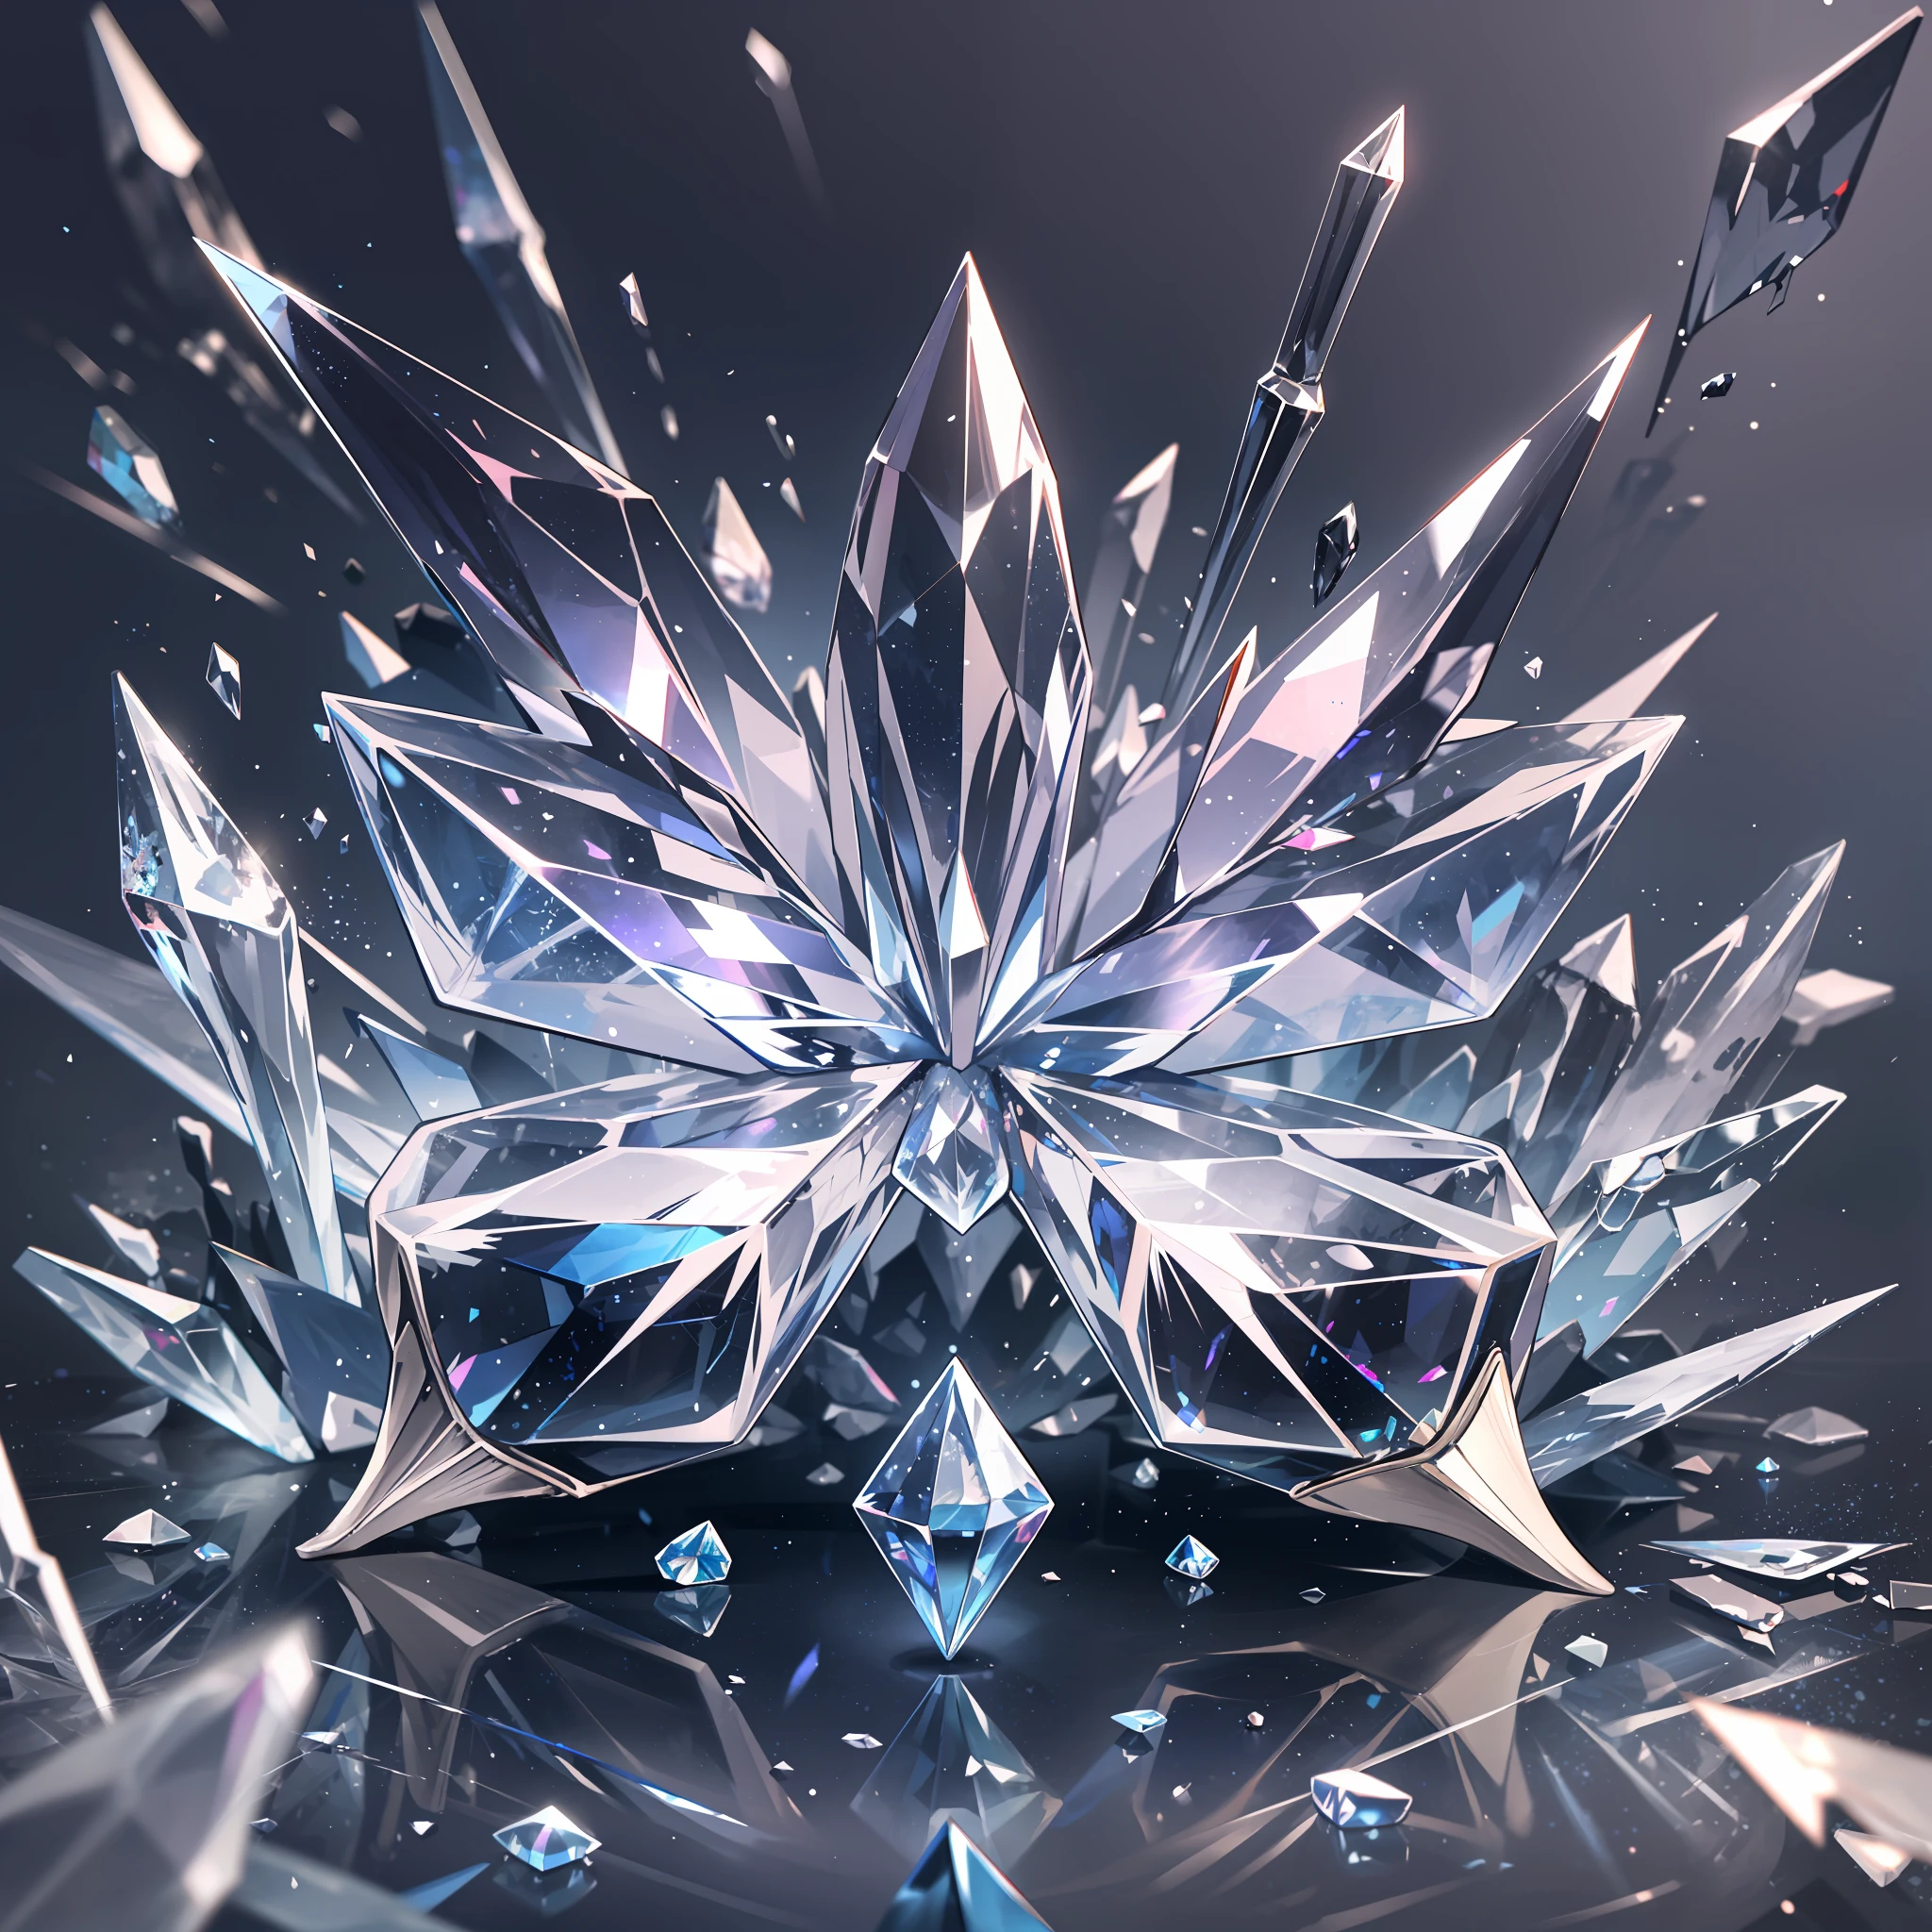 background with glass,crystal,beautiful detail background,{{{white butterfly}}}, diamond world, crystal flower,ice theme, falling ice,white crystal background, nihilism, frustration,glass rain,white ice,no people